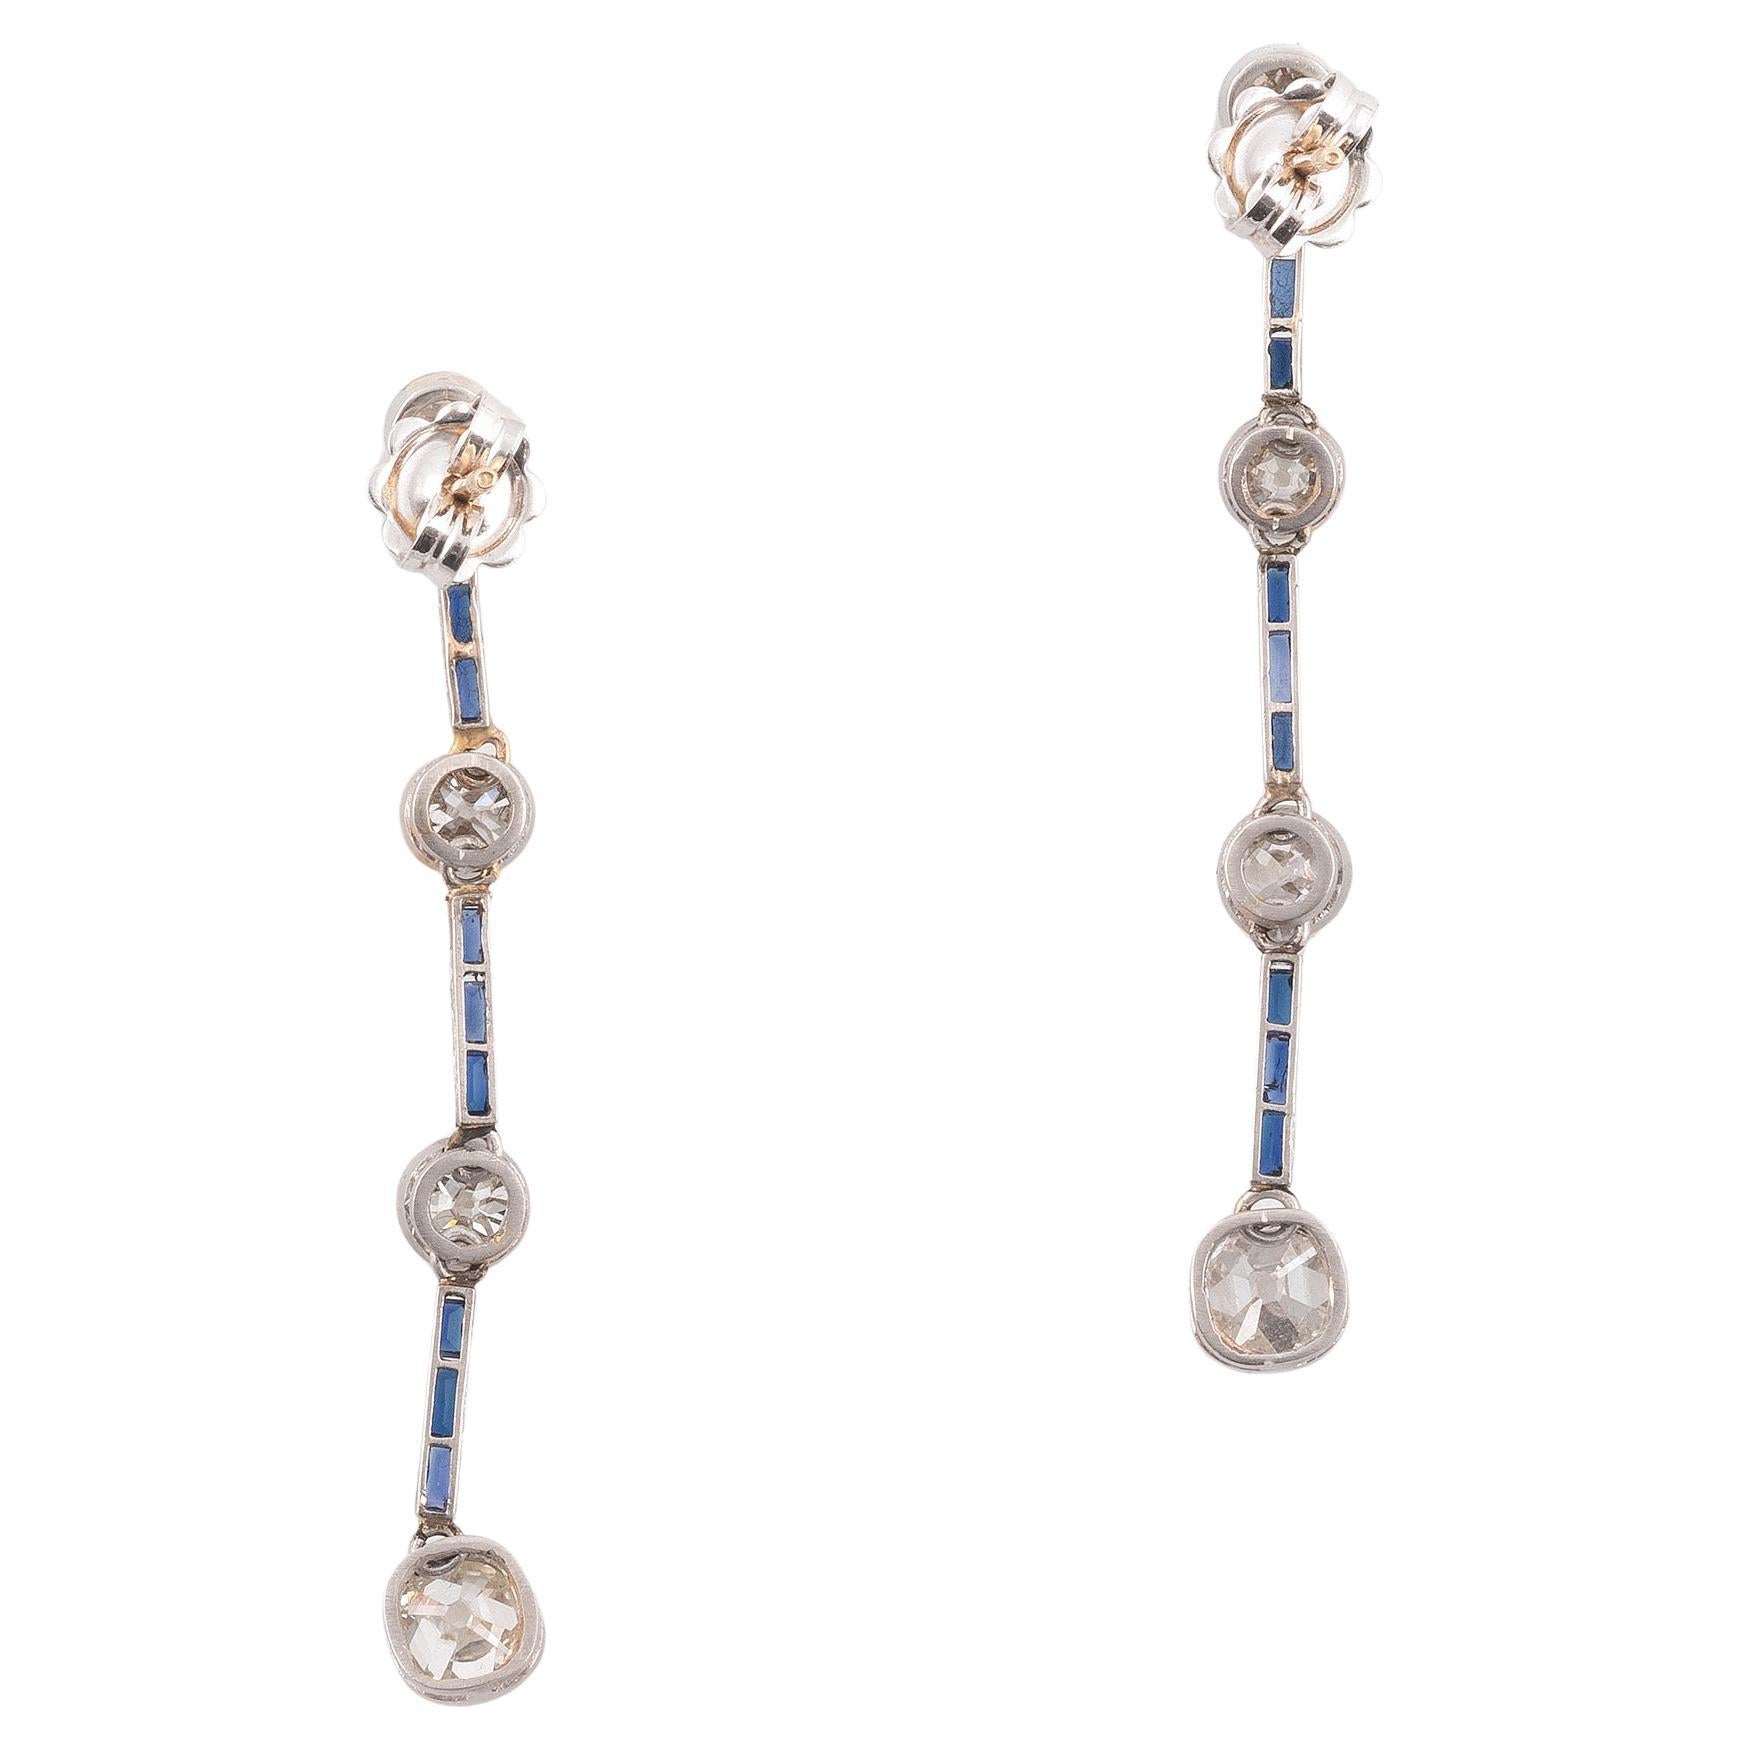 Each designed as an hanging row of four millegrain set old cut diamonds, the eight stones weighing overall approximately 3.50 cts, interspaced by collet set calibre cut sapphire.

Screw lock on the back.

Mounted in platinum.

Length: 5 cm

Weight: